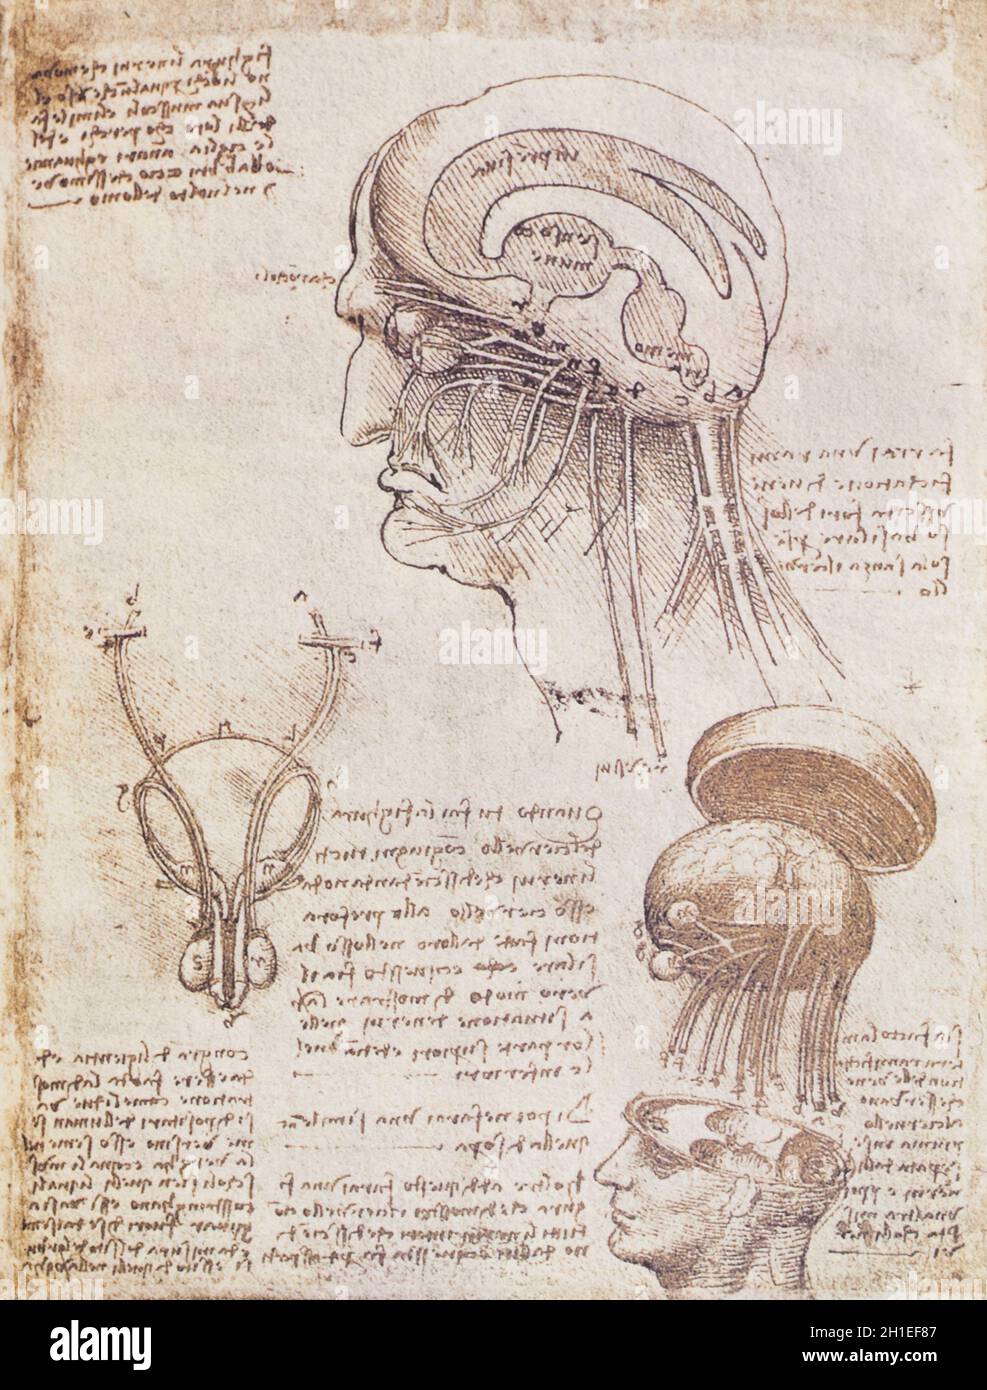 Physiological sketch of the human brain and skull by Leonardo Da Vinci, 1510. Royal Collection, United Kingdom Stock Photo